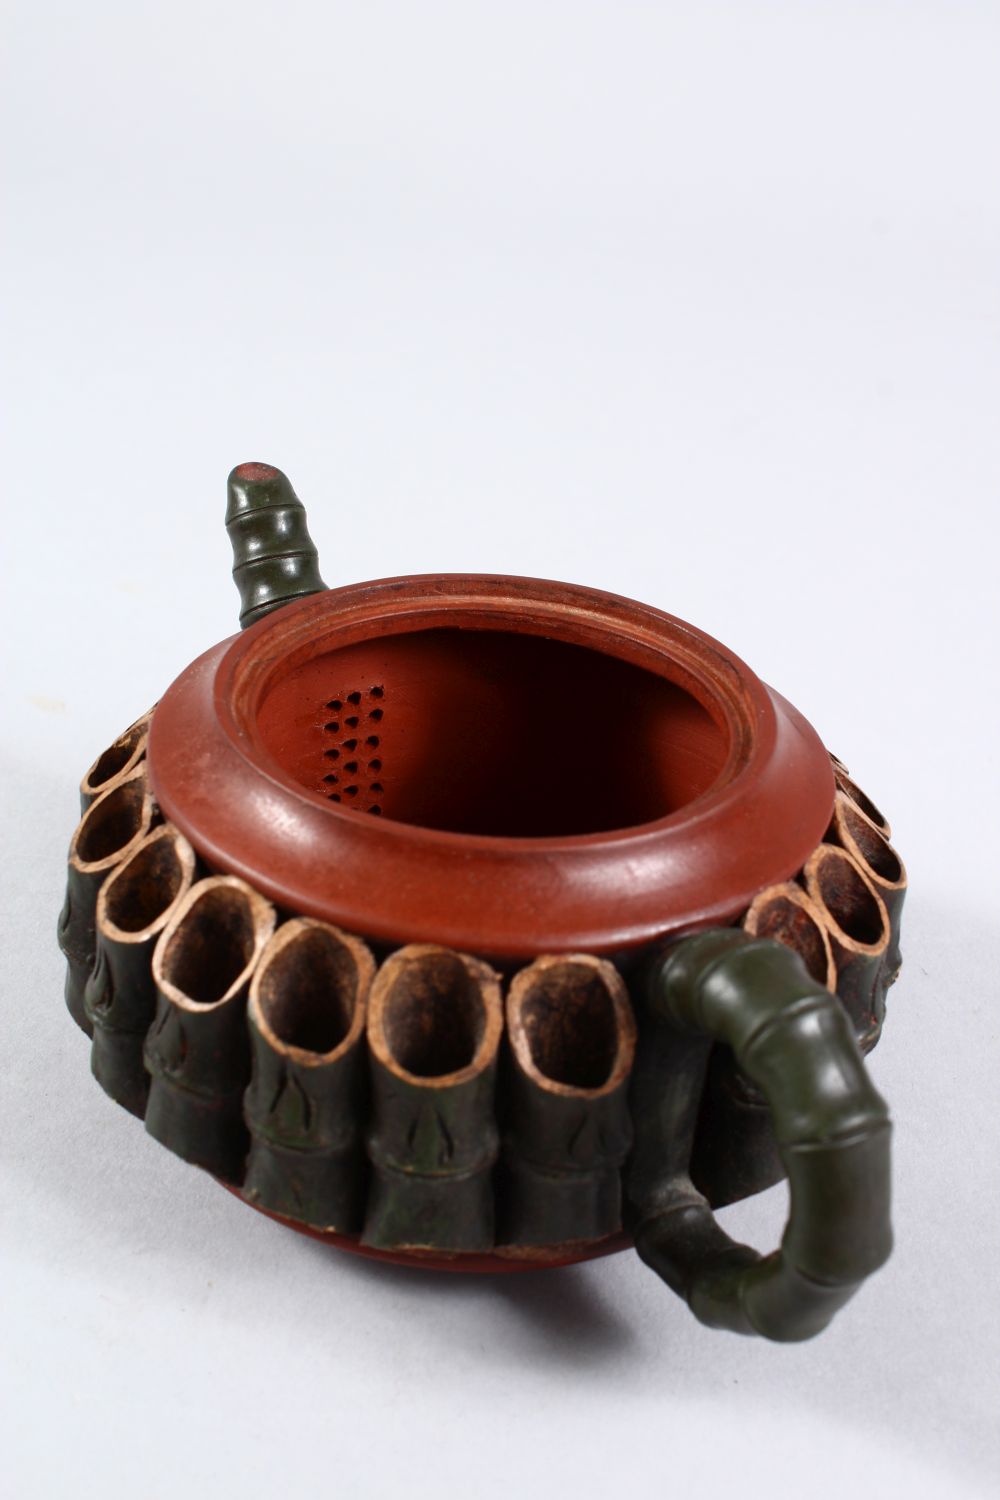 A GOOD 19TH / 20TH CENTURY CHINESE YIXING CLAY TEAPOT, the body with moulded bamboo form, with a - Image 4 of 7